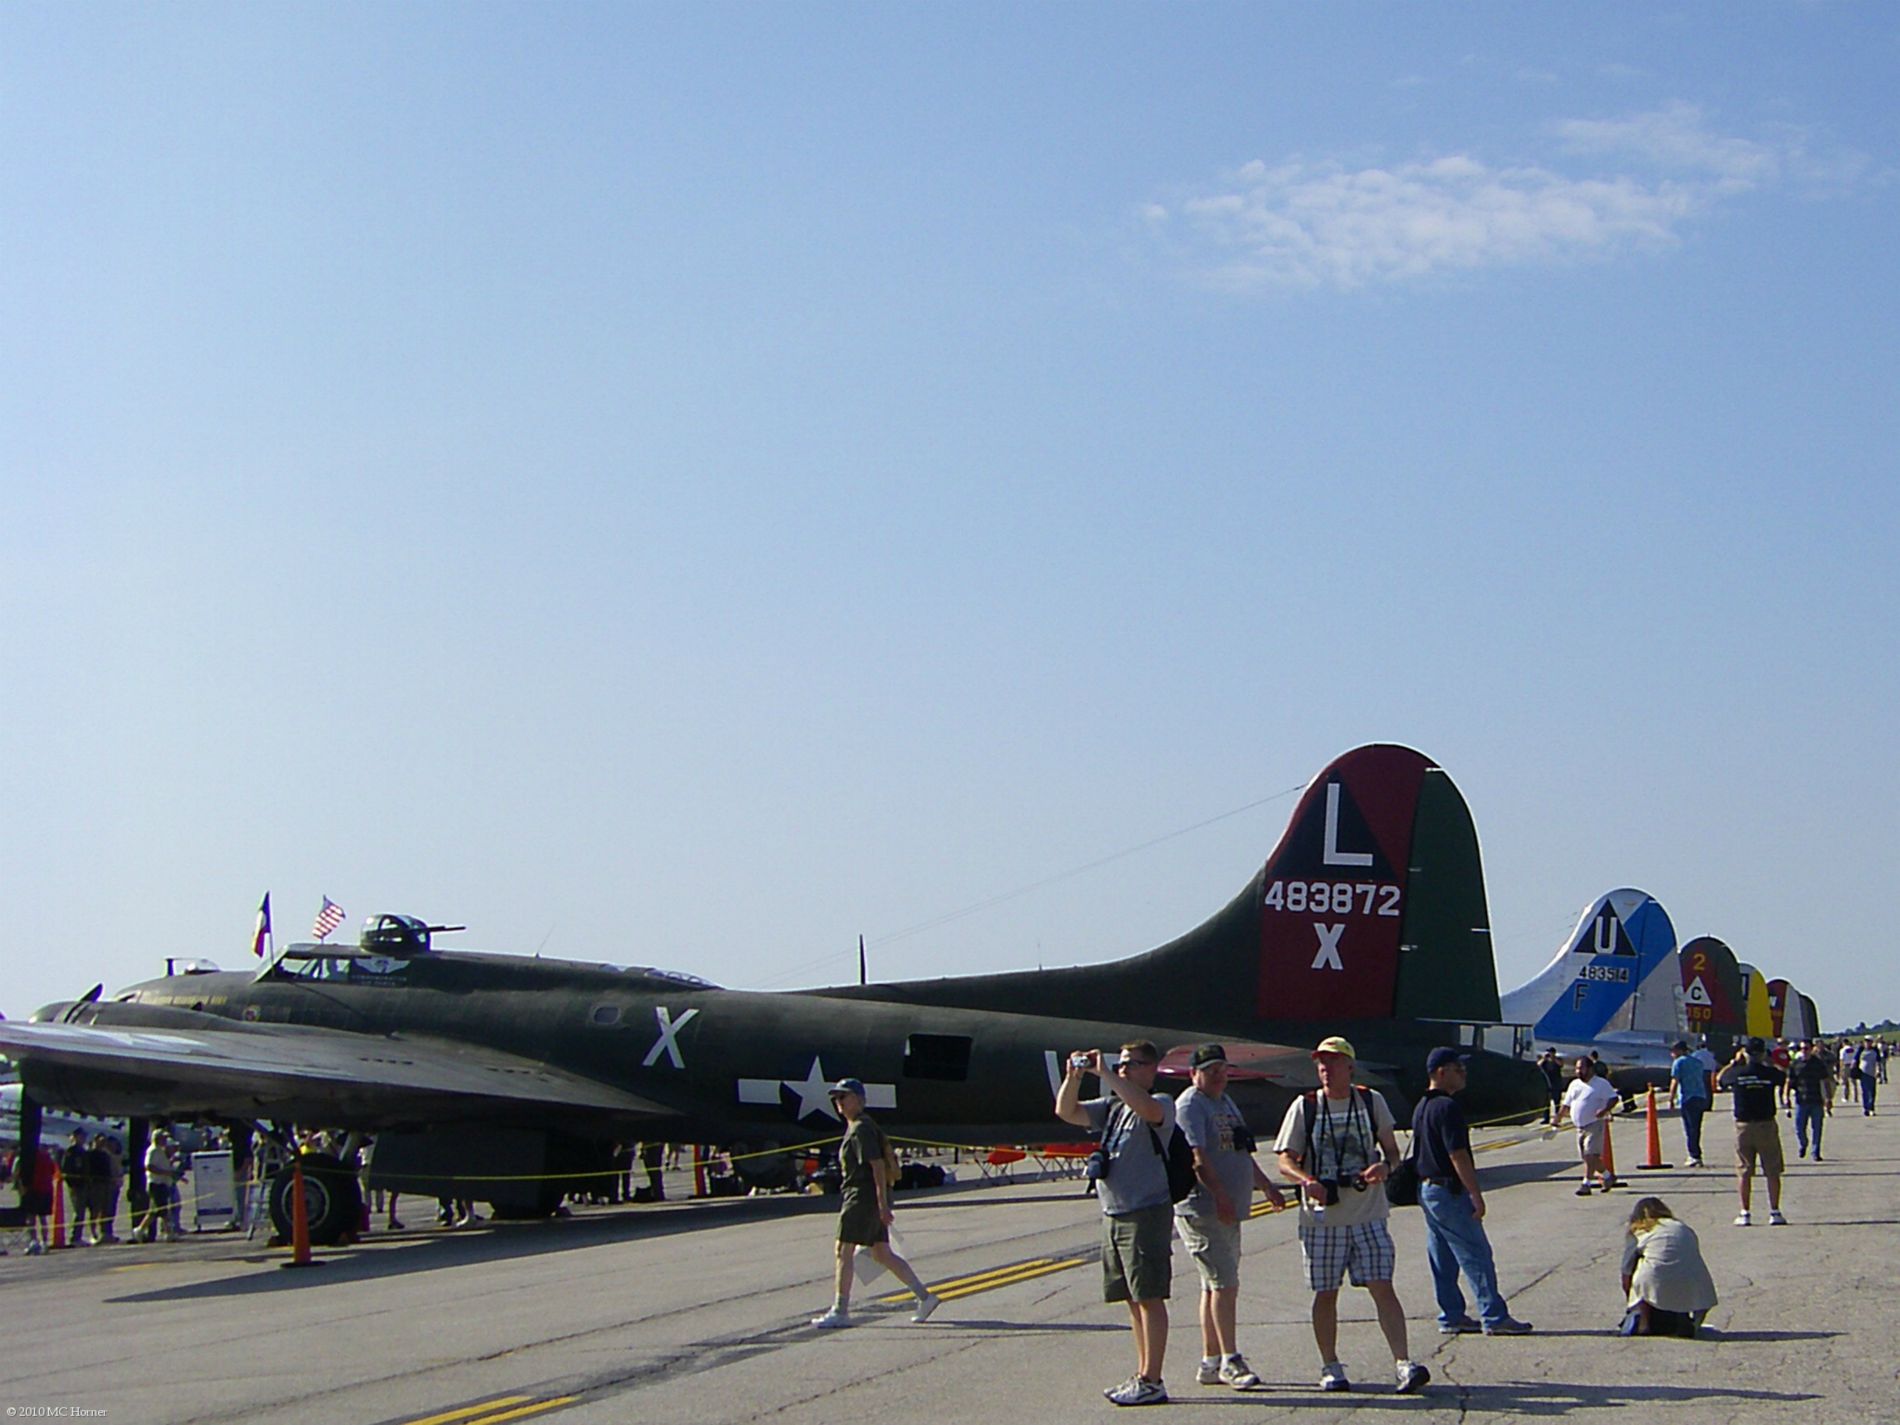 South end of row of B-17s.